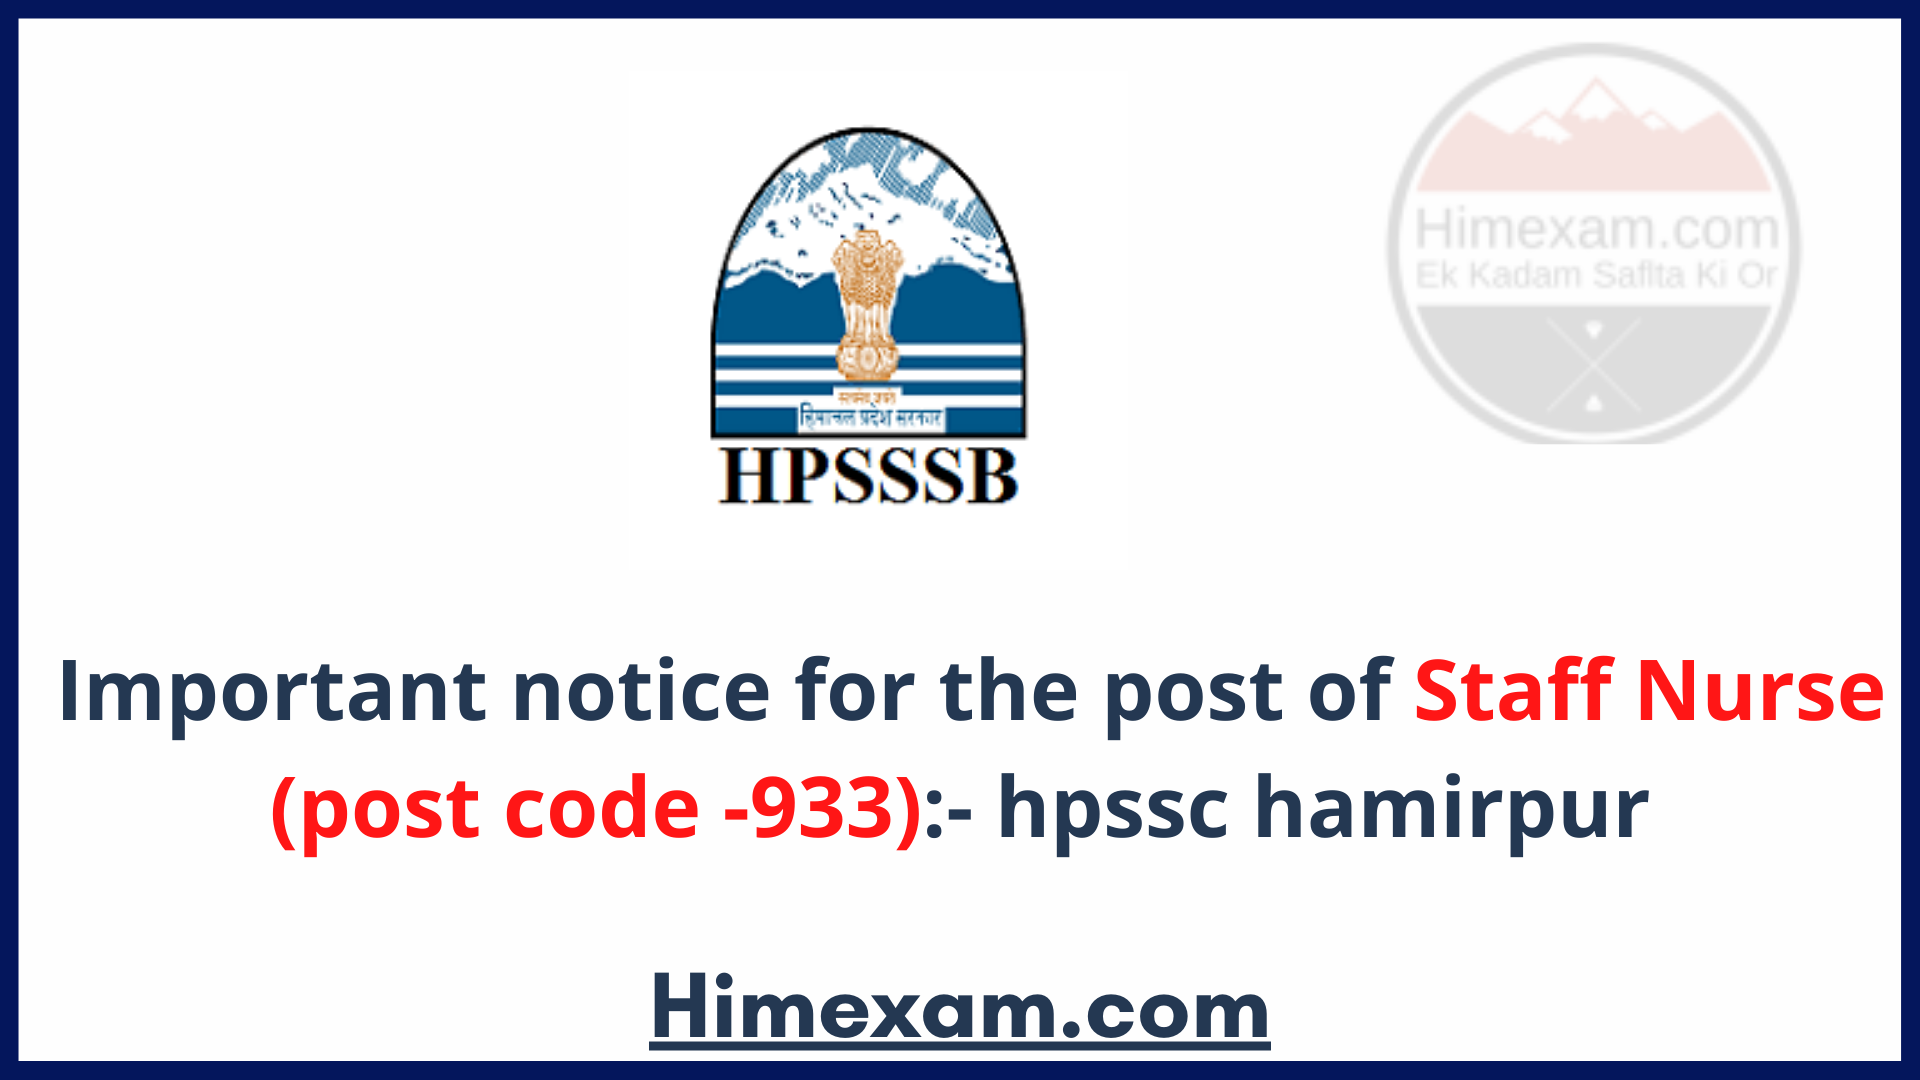 Important notice for the post of Staff Nurse (post code -933):- hpssc hamirpur